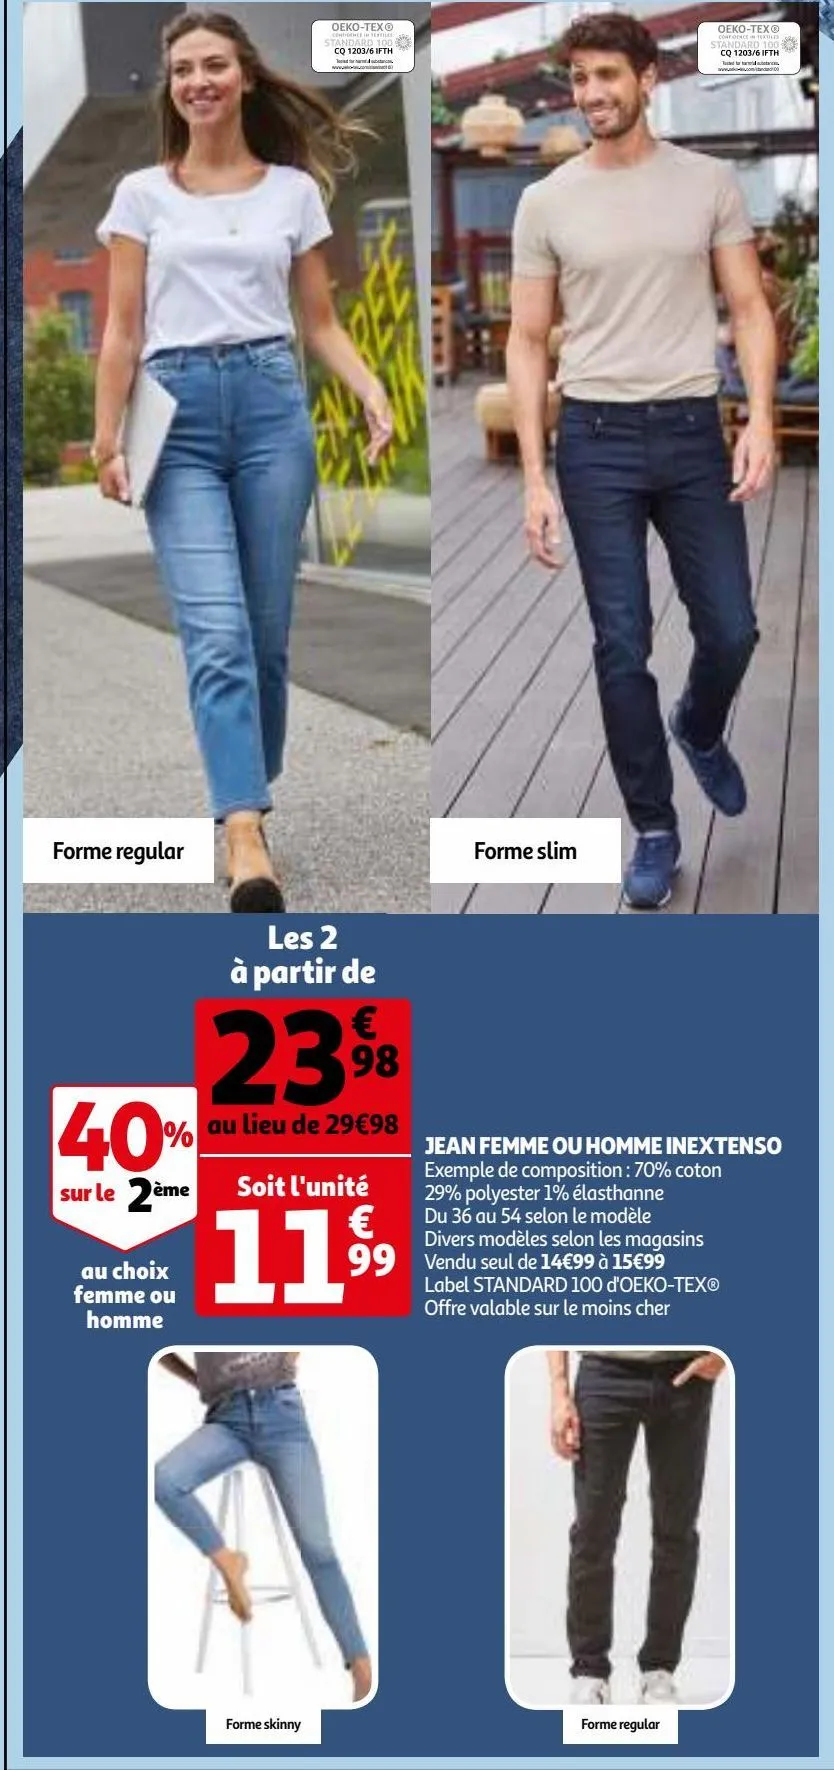 jean femme ou homme inextenso 